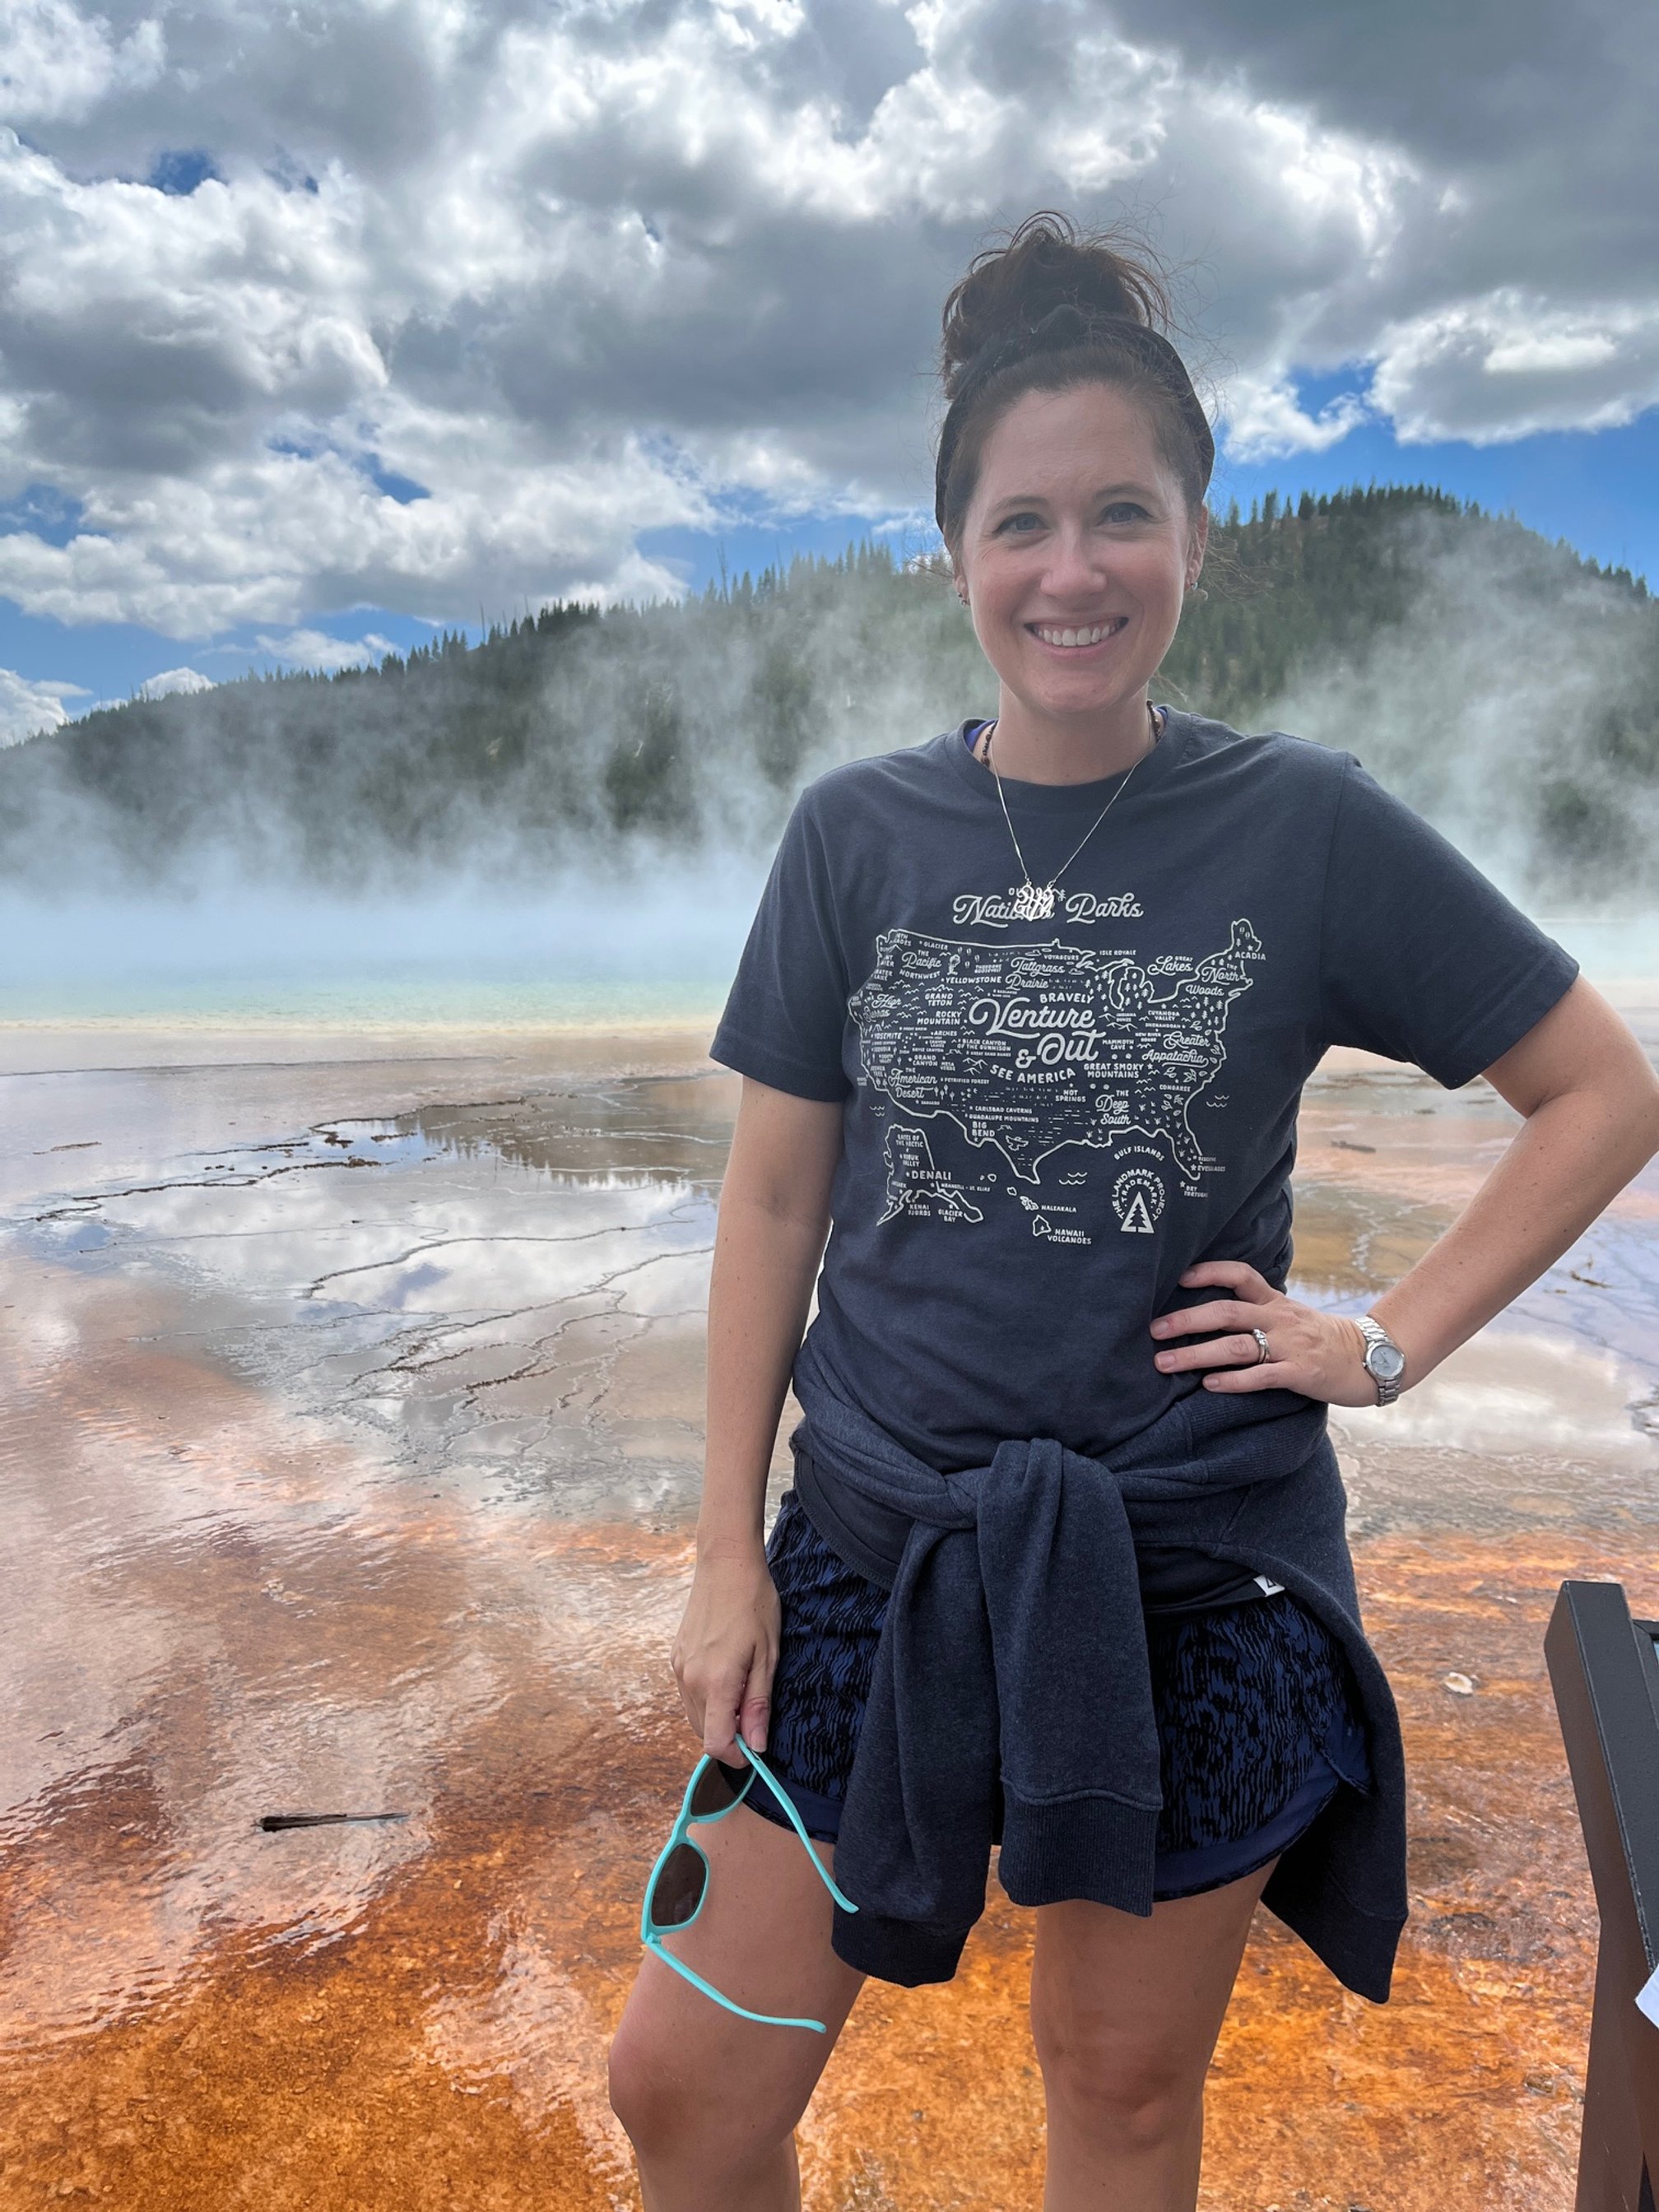 At the Grand Prismatic Spring in Yellowstone